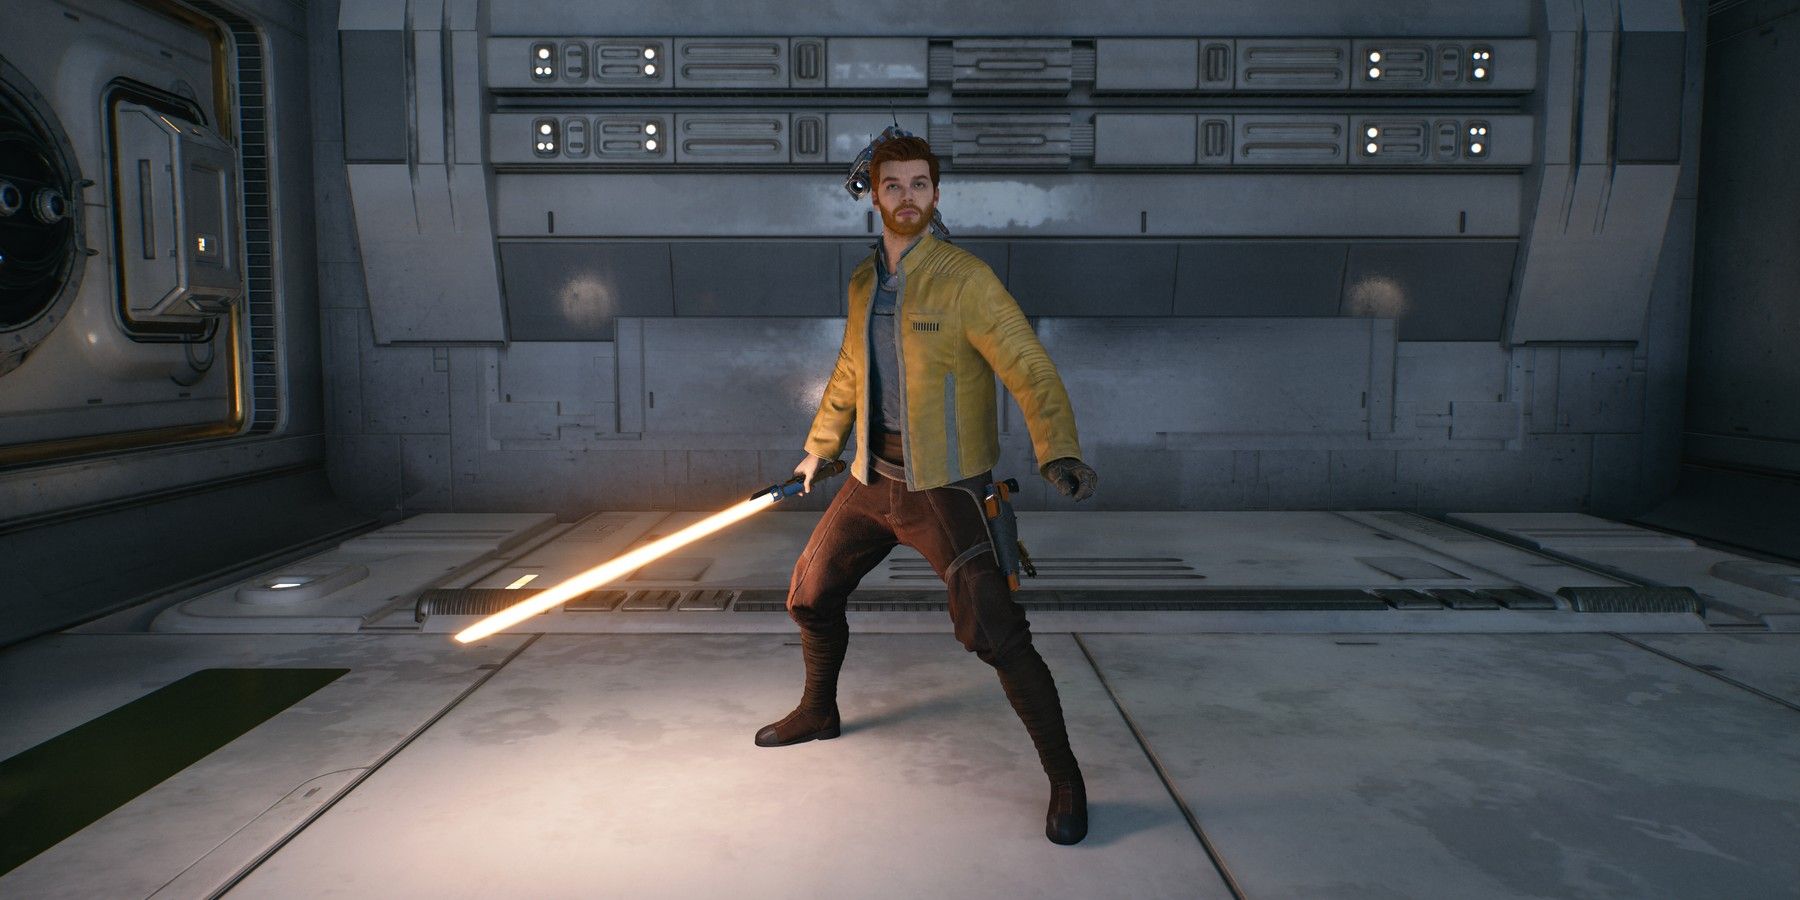 All Star Wars Jedi Survivor powers and abilities